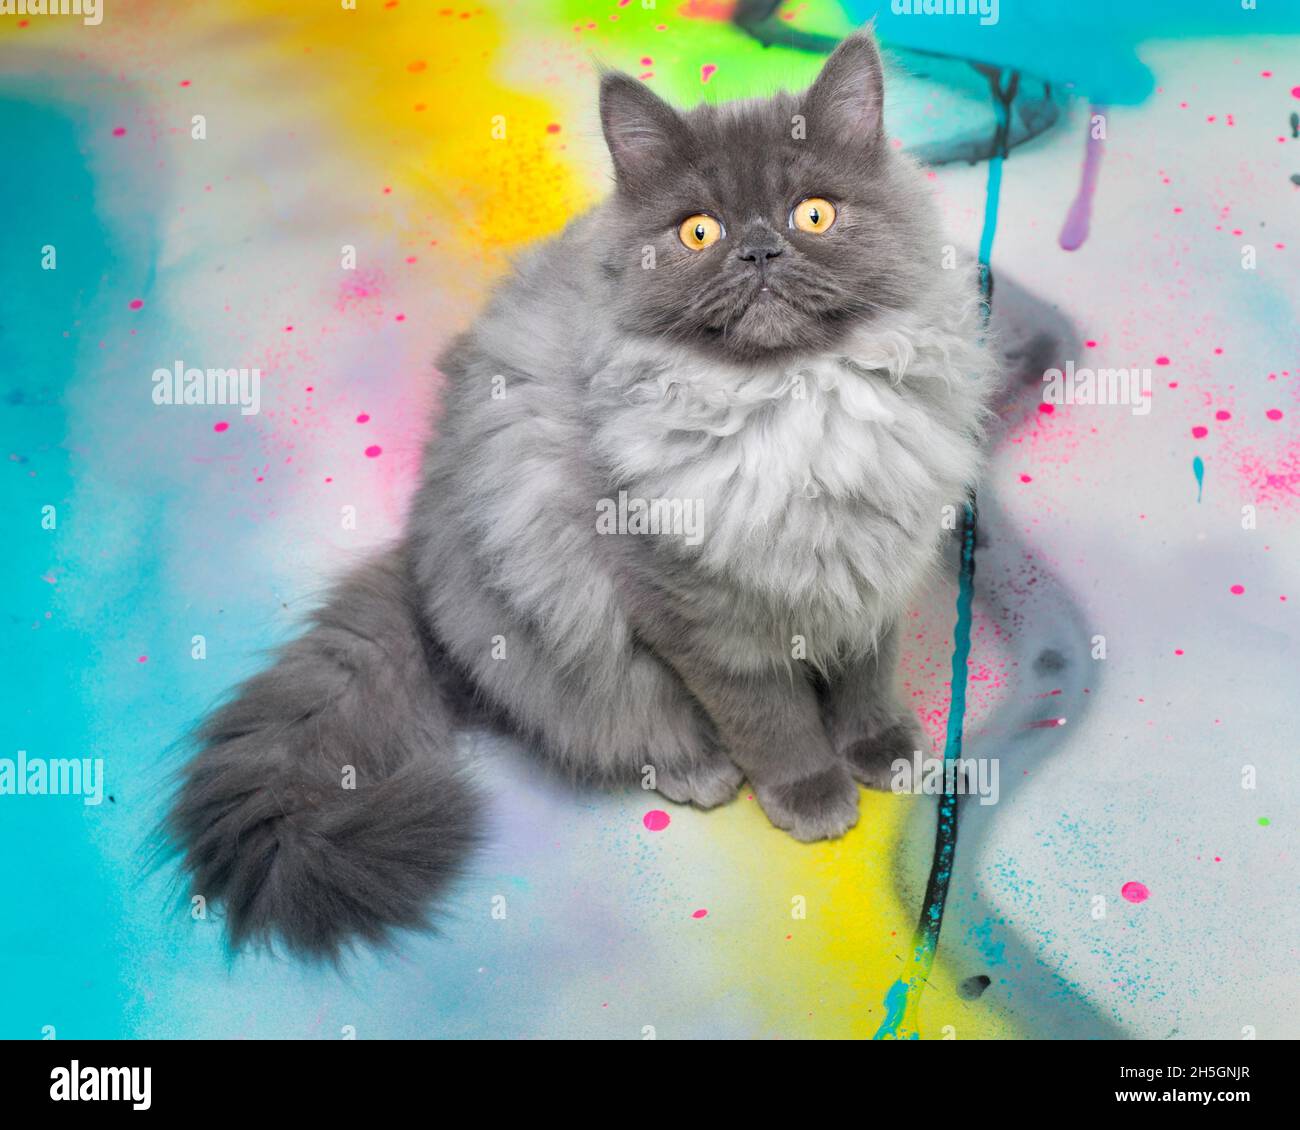 Cute fluffy grey cat sitting and looking up, on a neon painted surface. Stock Photo